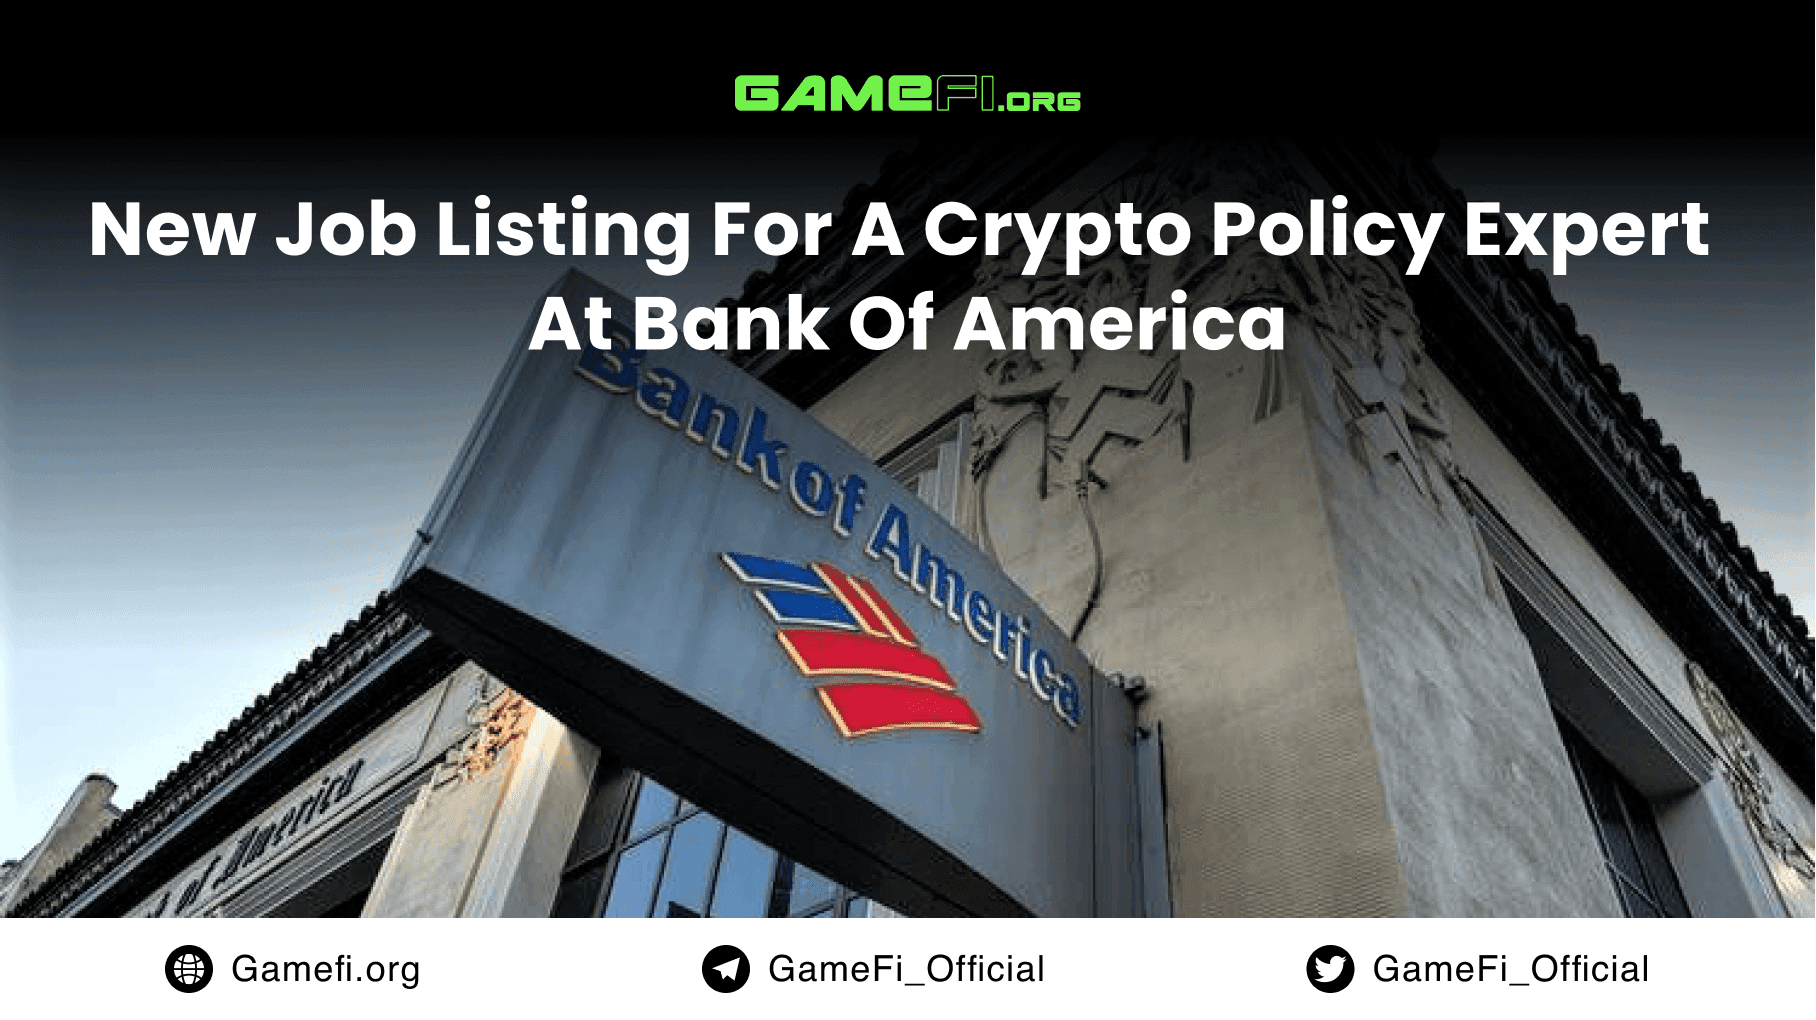 New Job Listing for a Crypto Policy Expert at Bank of America